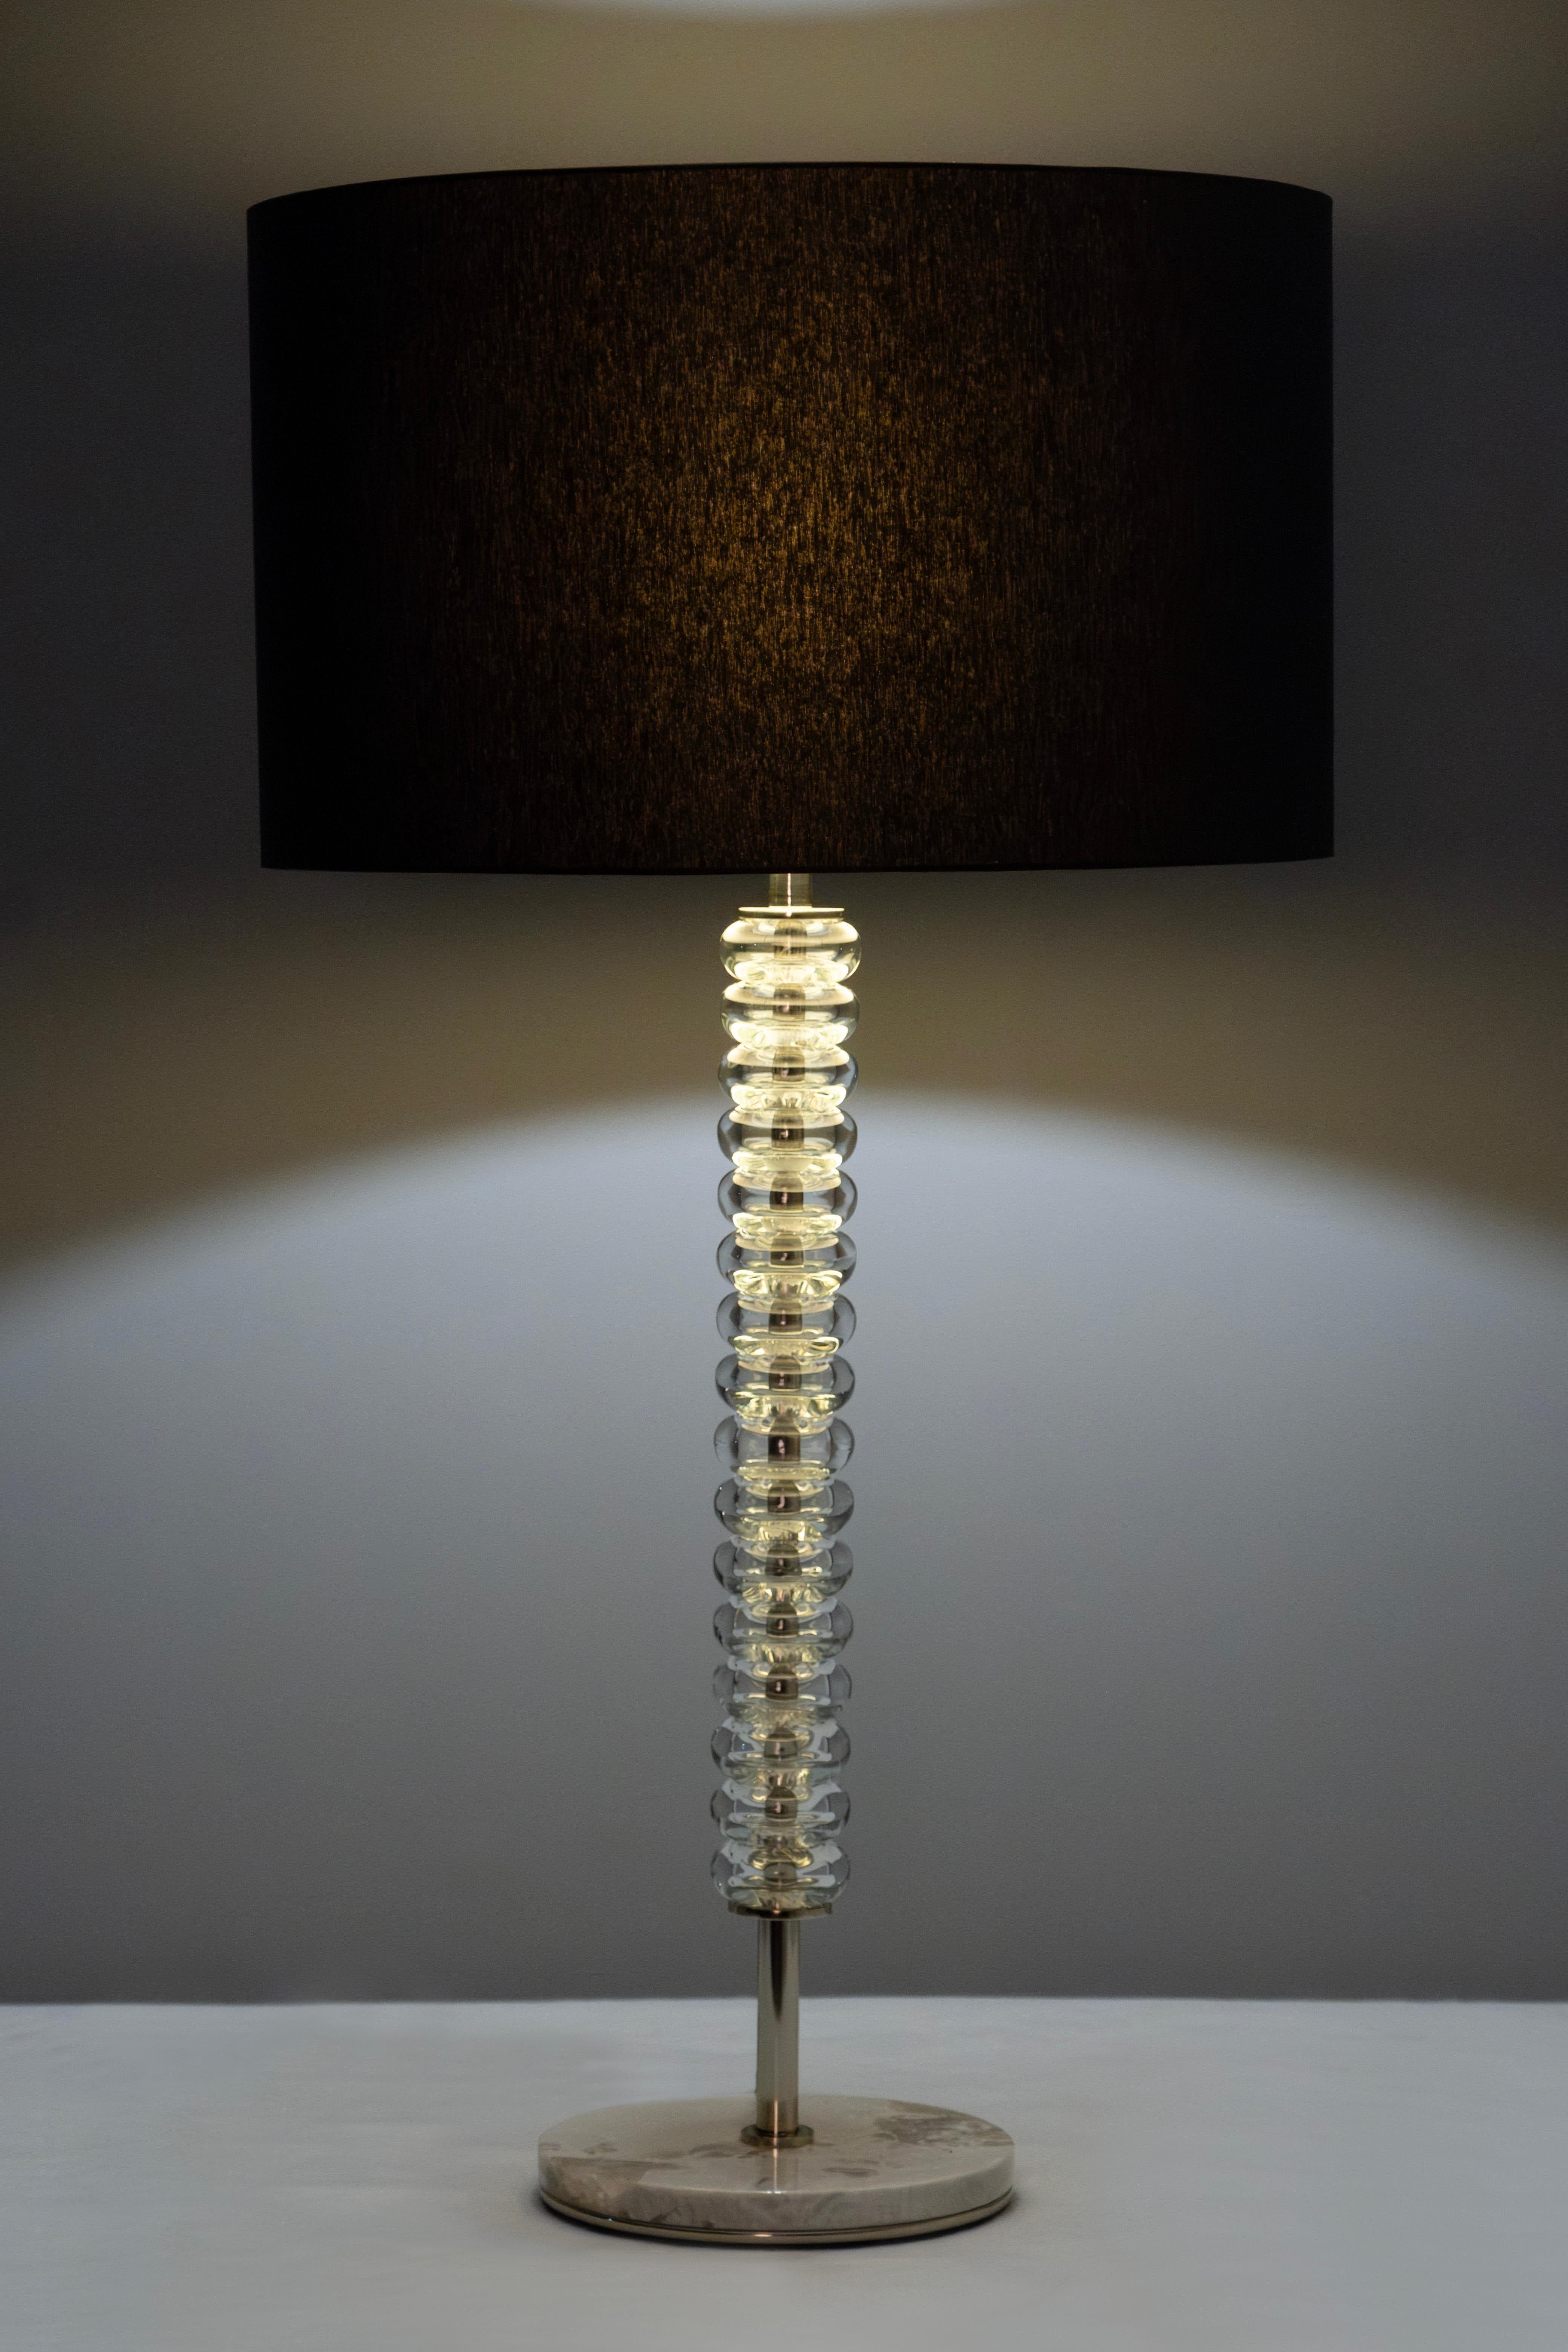 Saldanha Table Lamp, Modern Collection, Handcrafted in Portugal - Europe by GF Modern.

A luxurious table lamp, Saldanha creates the subliminal ambiance for exceptional living. The clear-glass spheres harmonize the wonderful contrast between the